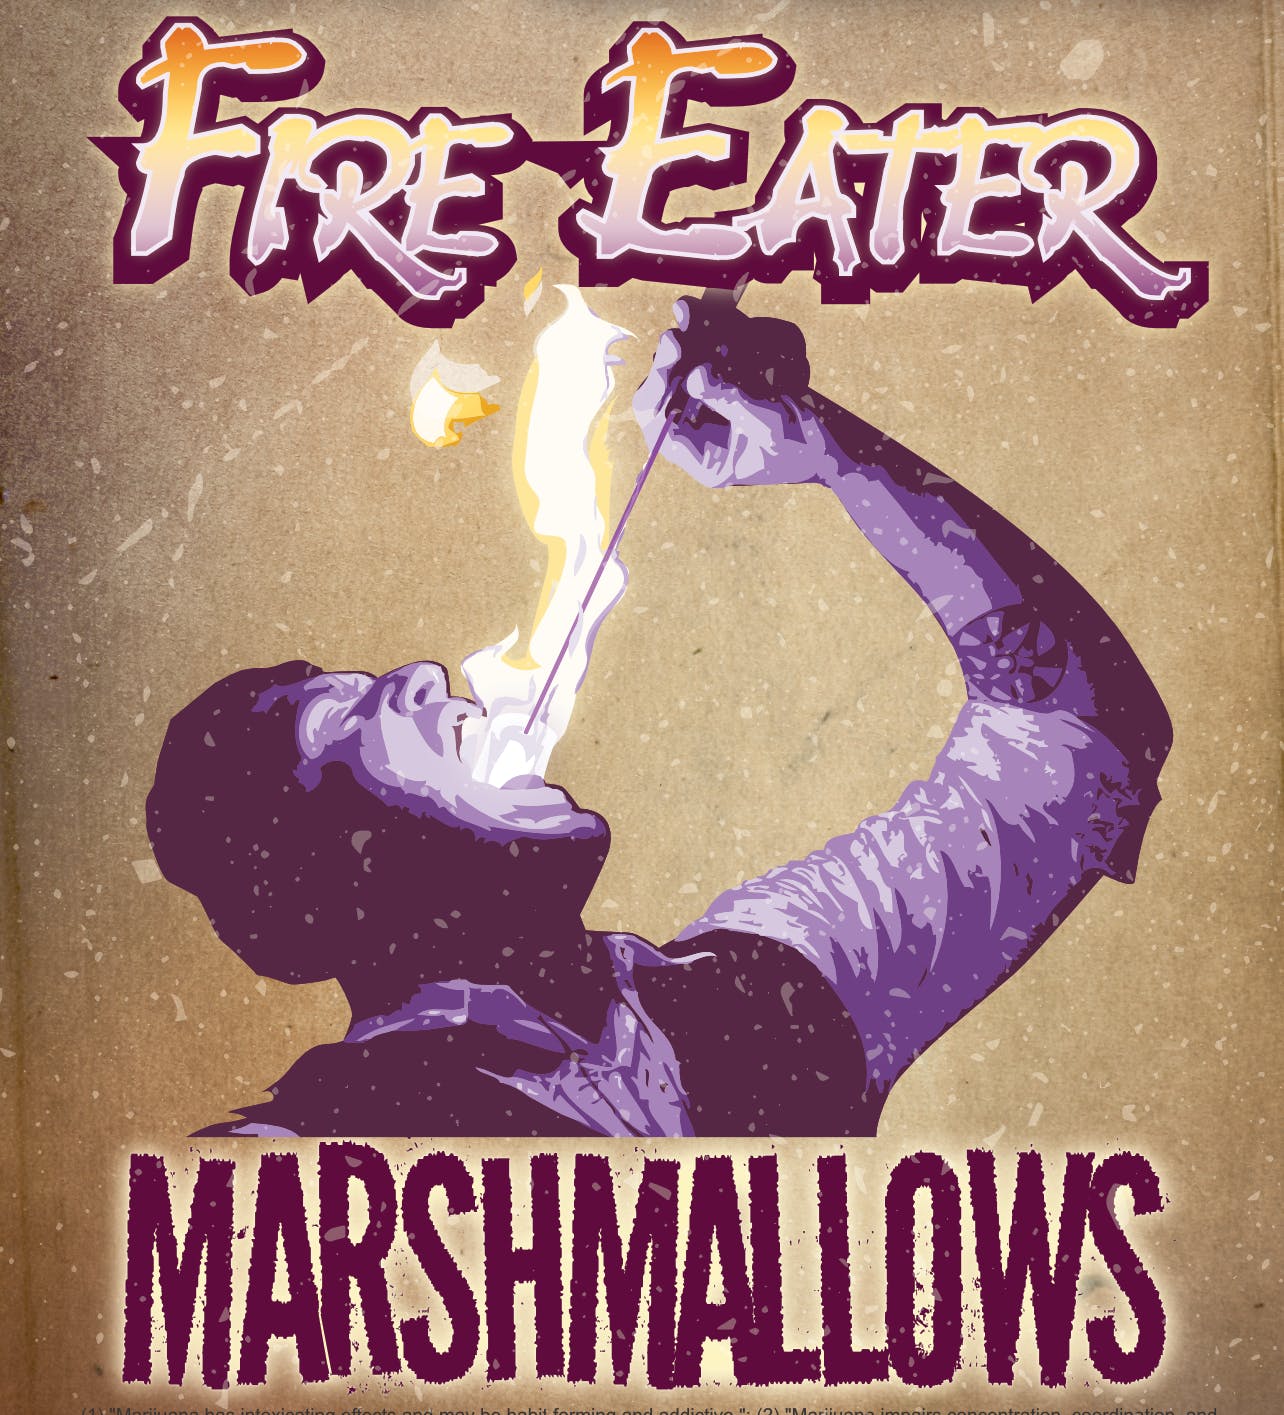 edible-marshmallows-by-fire-eater